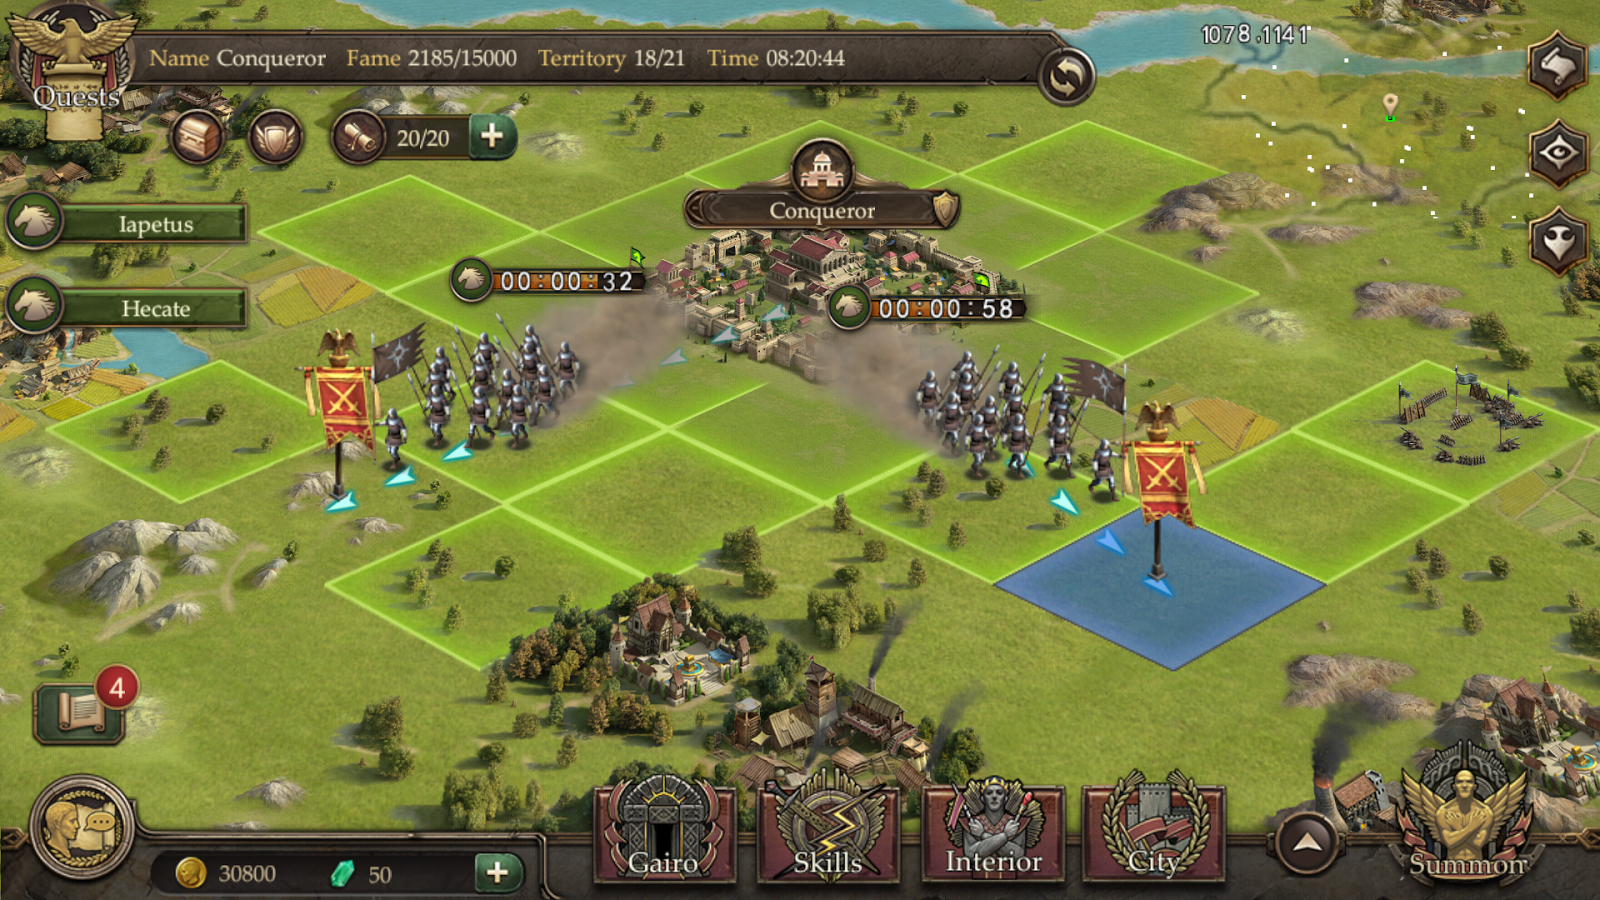 Immortal Conquest - the (arguably) best strategic game on Android